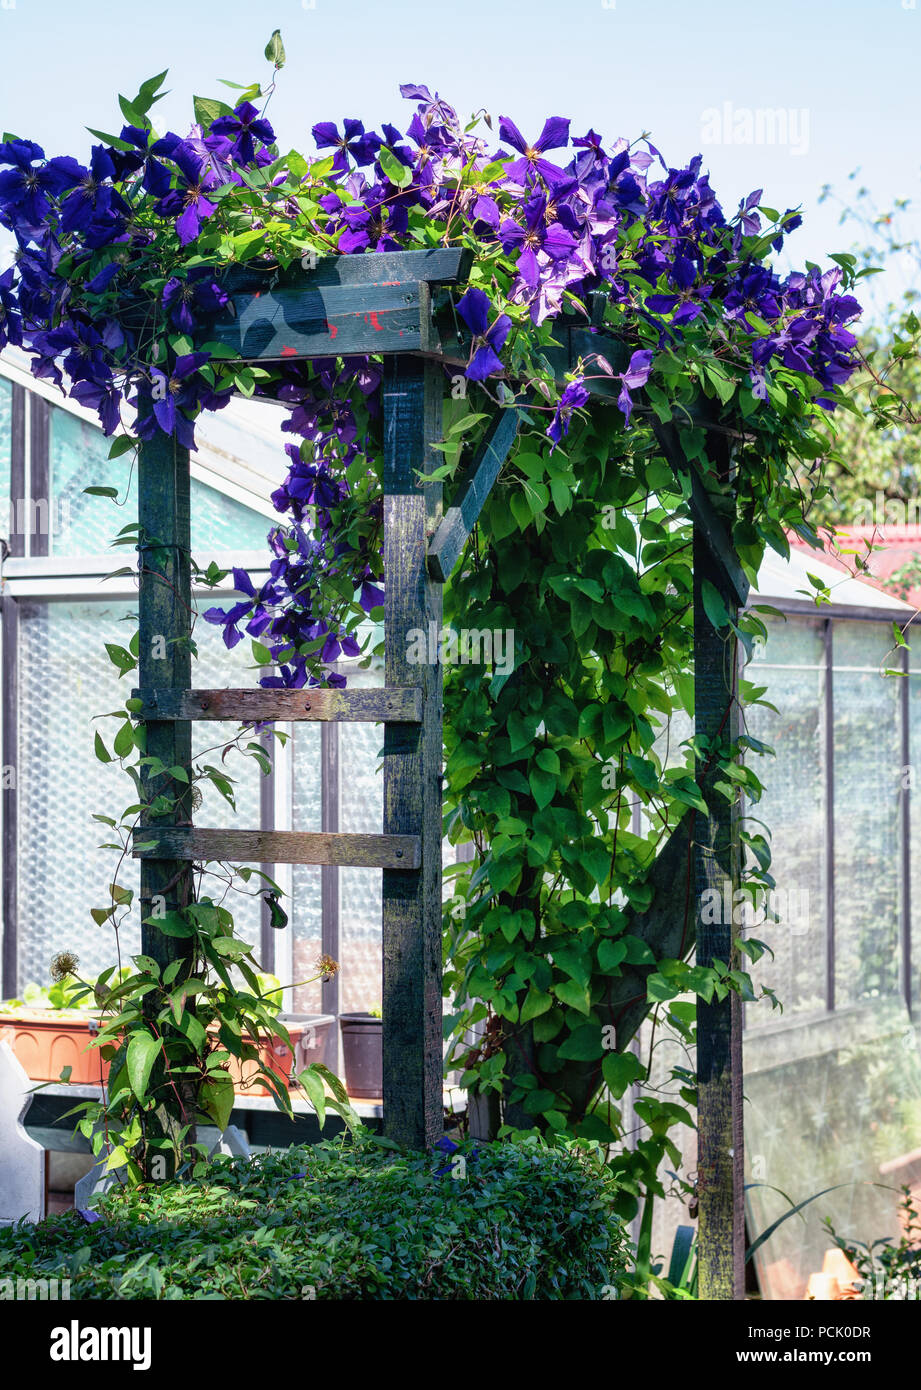 Arcade beautifully covered with a flowering clematis in The Netherlands Stock Photo